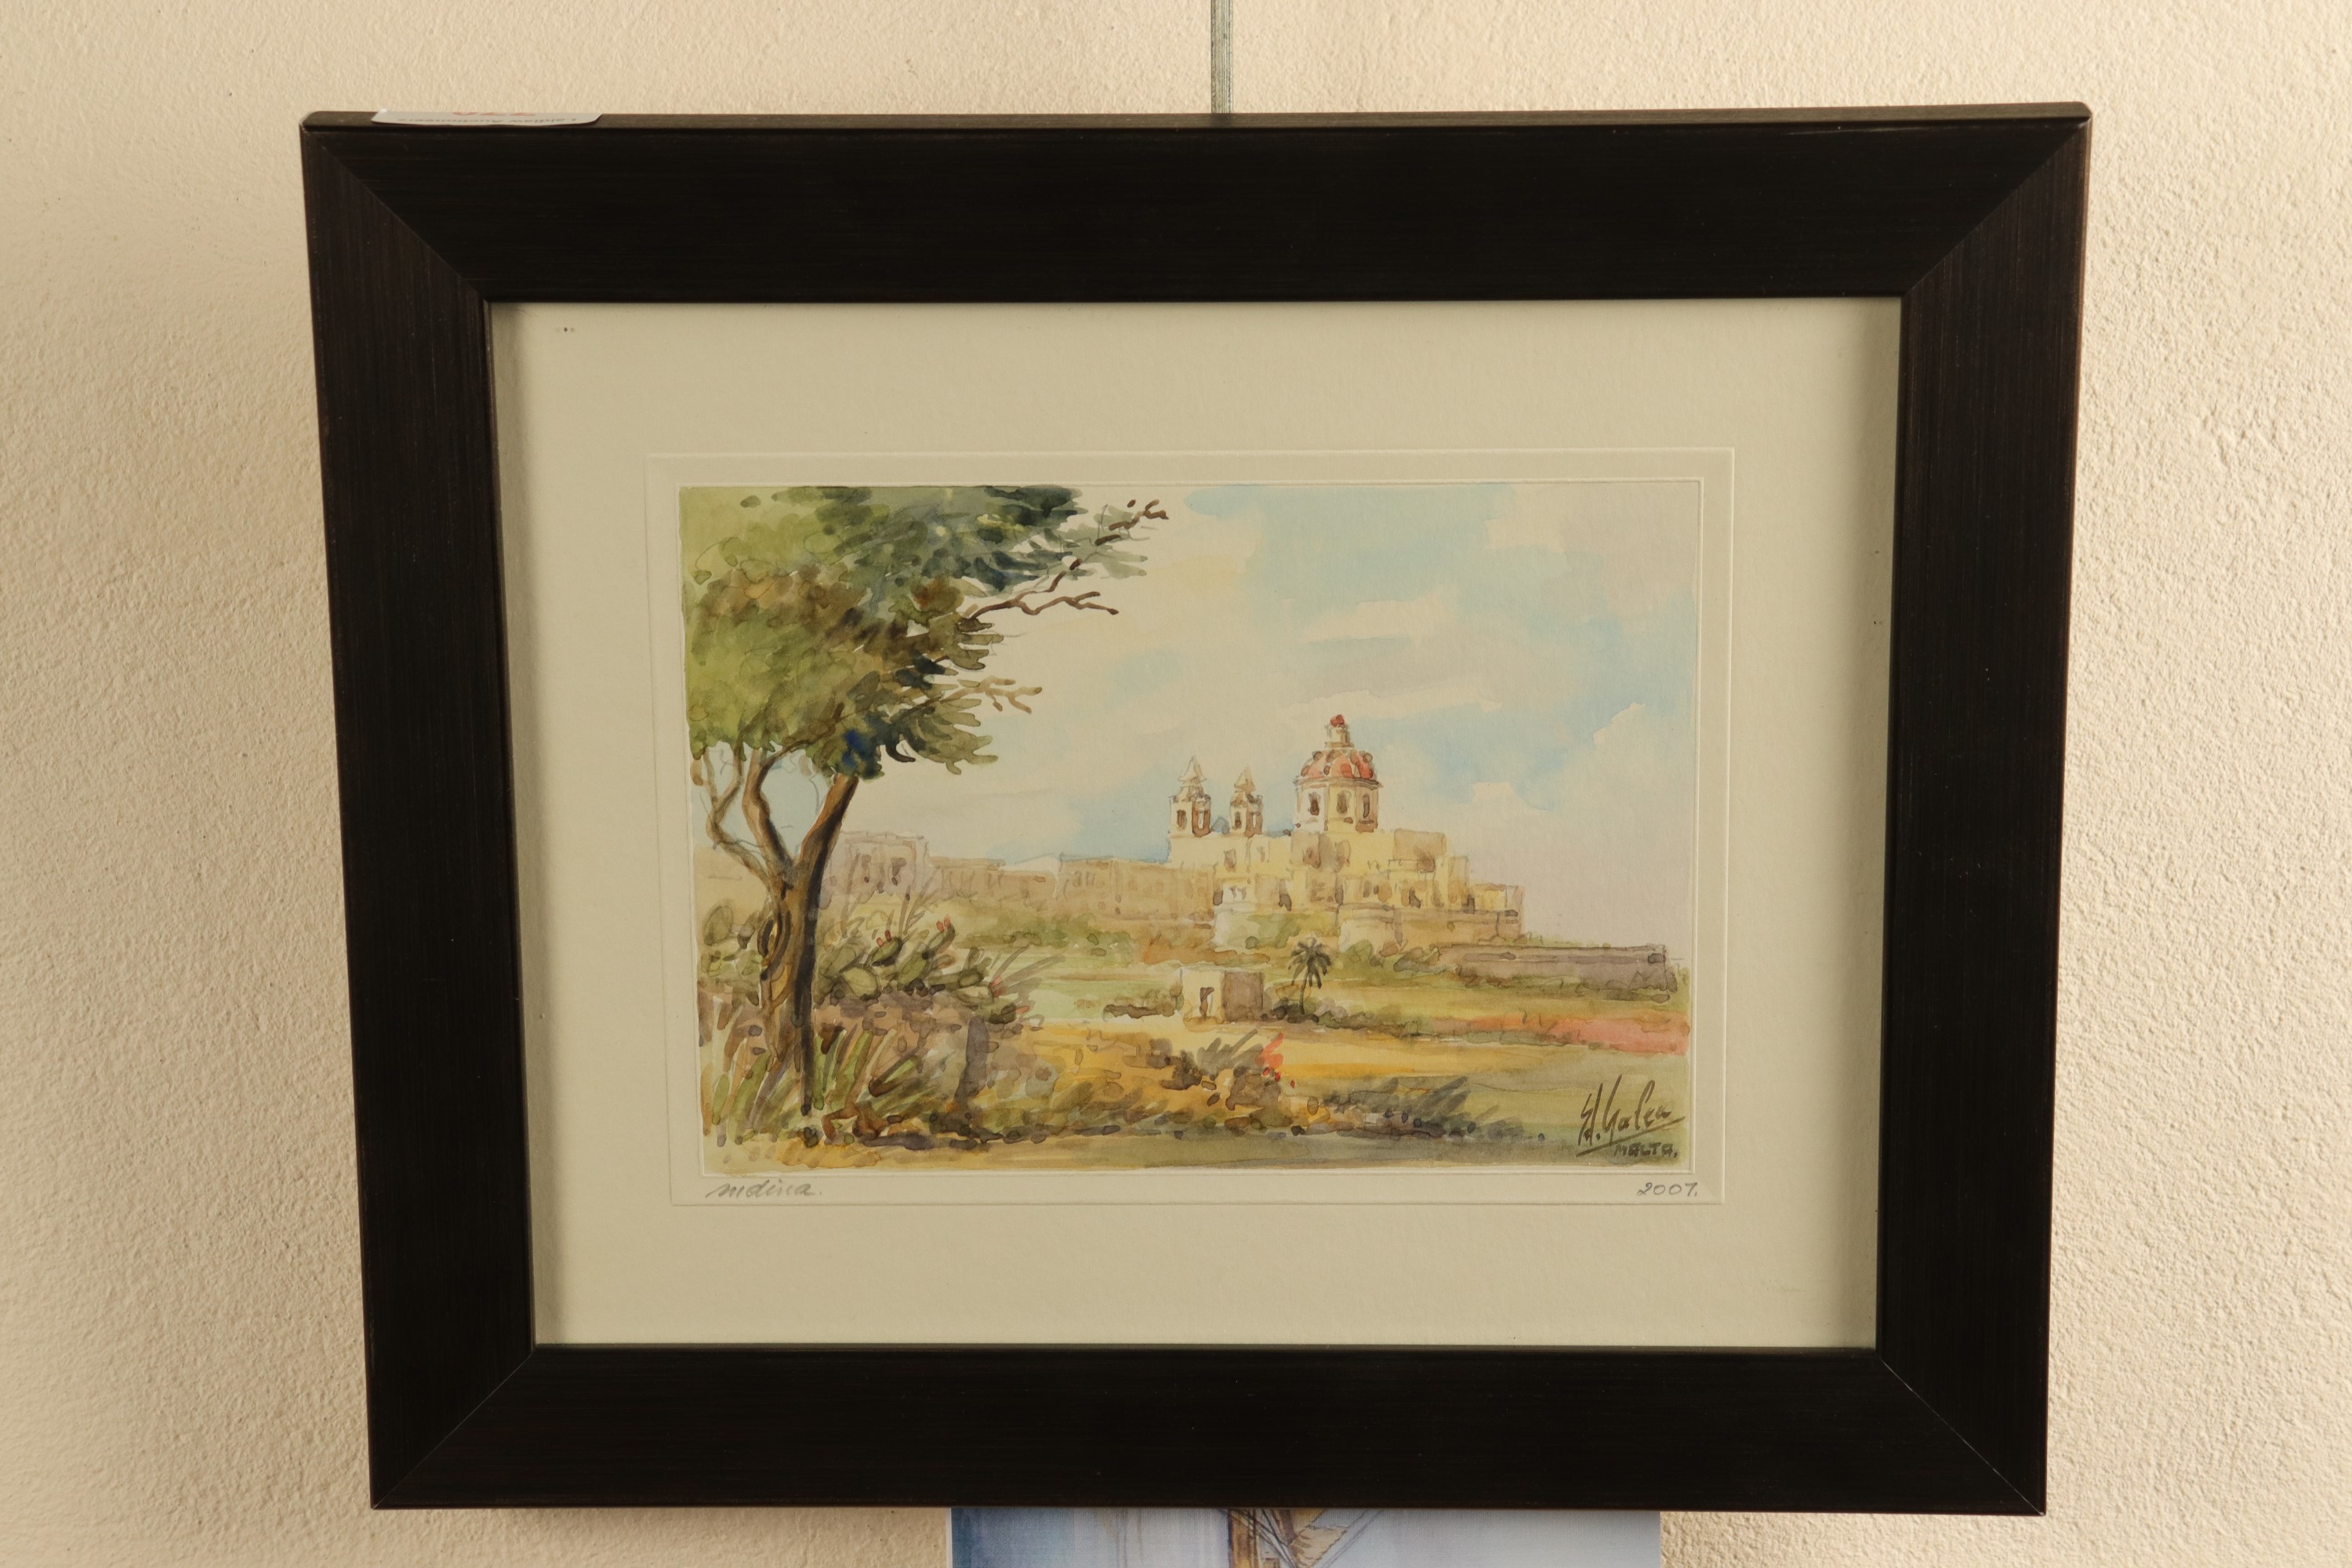 Edwin Galea (Maltese b 1934), Mdina, watercolour, signed and dated 2007, framed under glass, 25 cm x